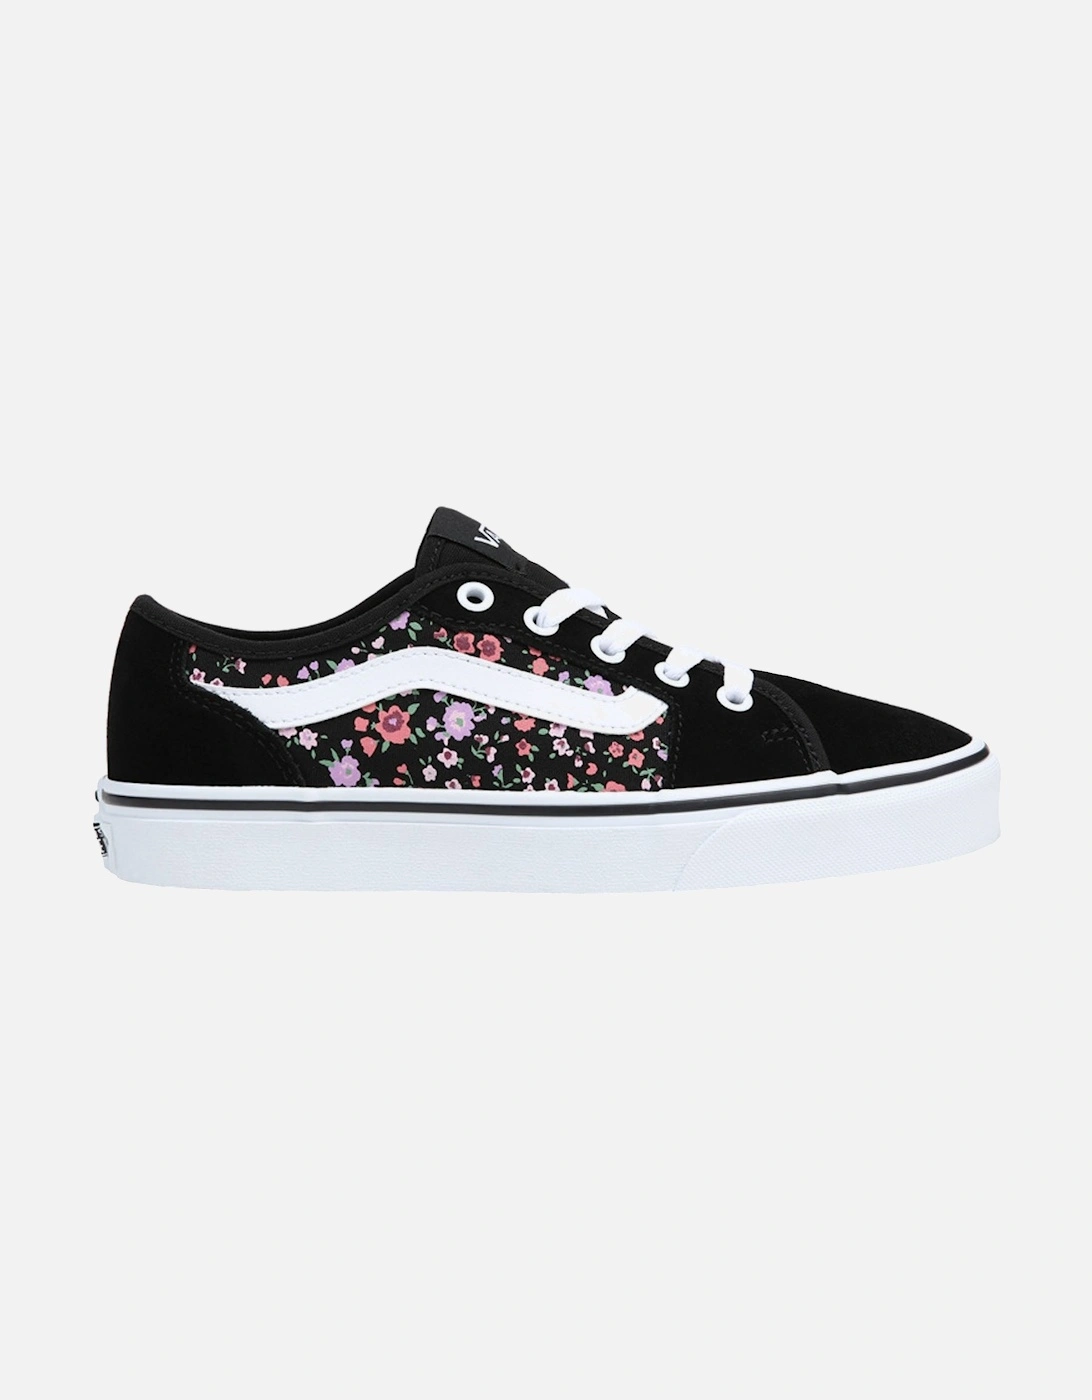 Womens Filmore Decon Low Rise Trainers